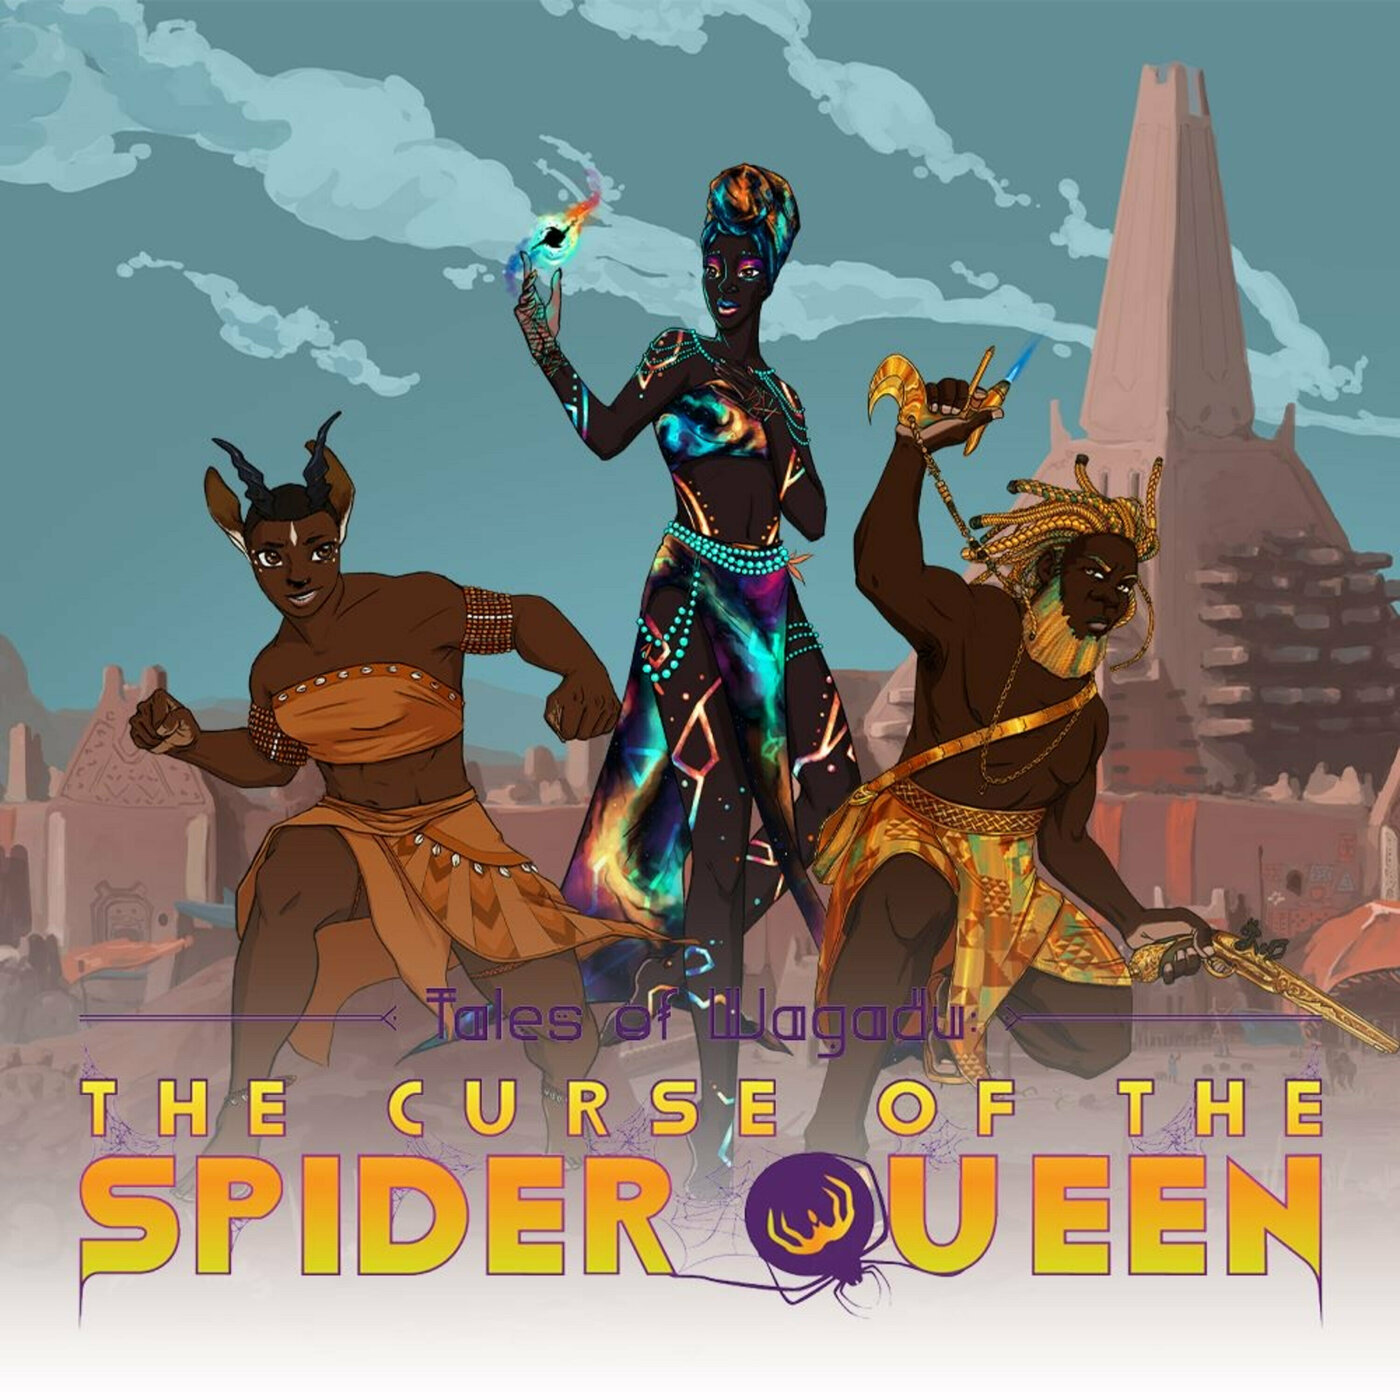 Tales of Wagadu: The Curse of the Spider Queen Ep. 11 